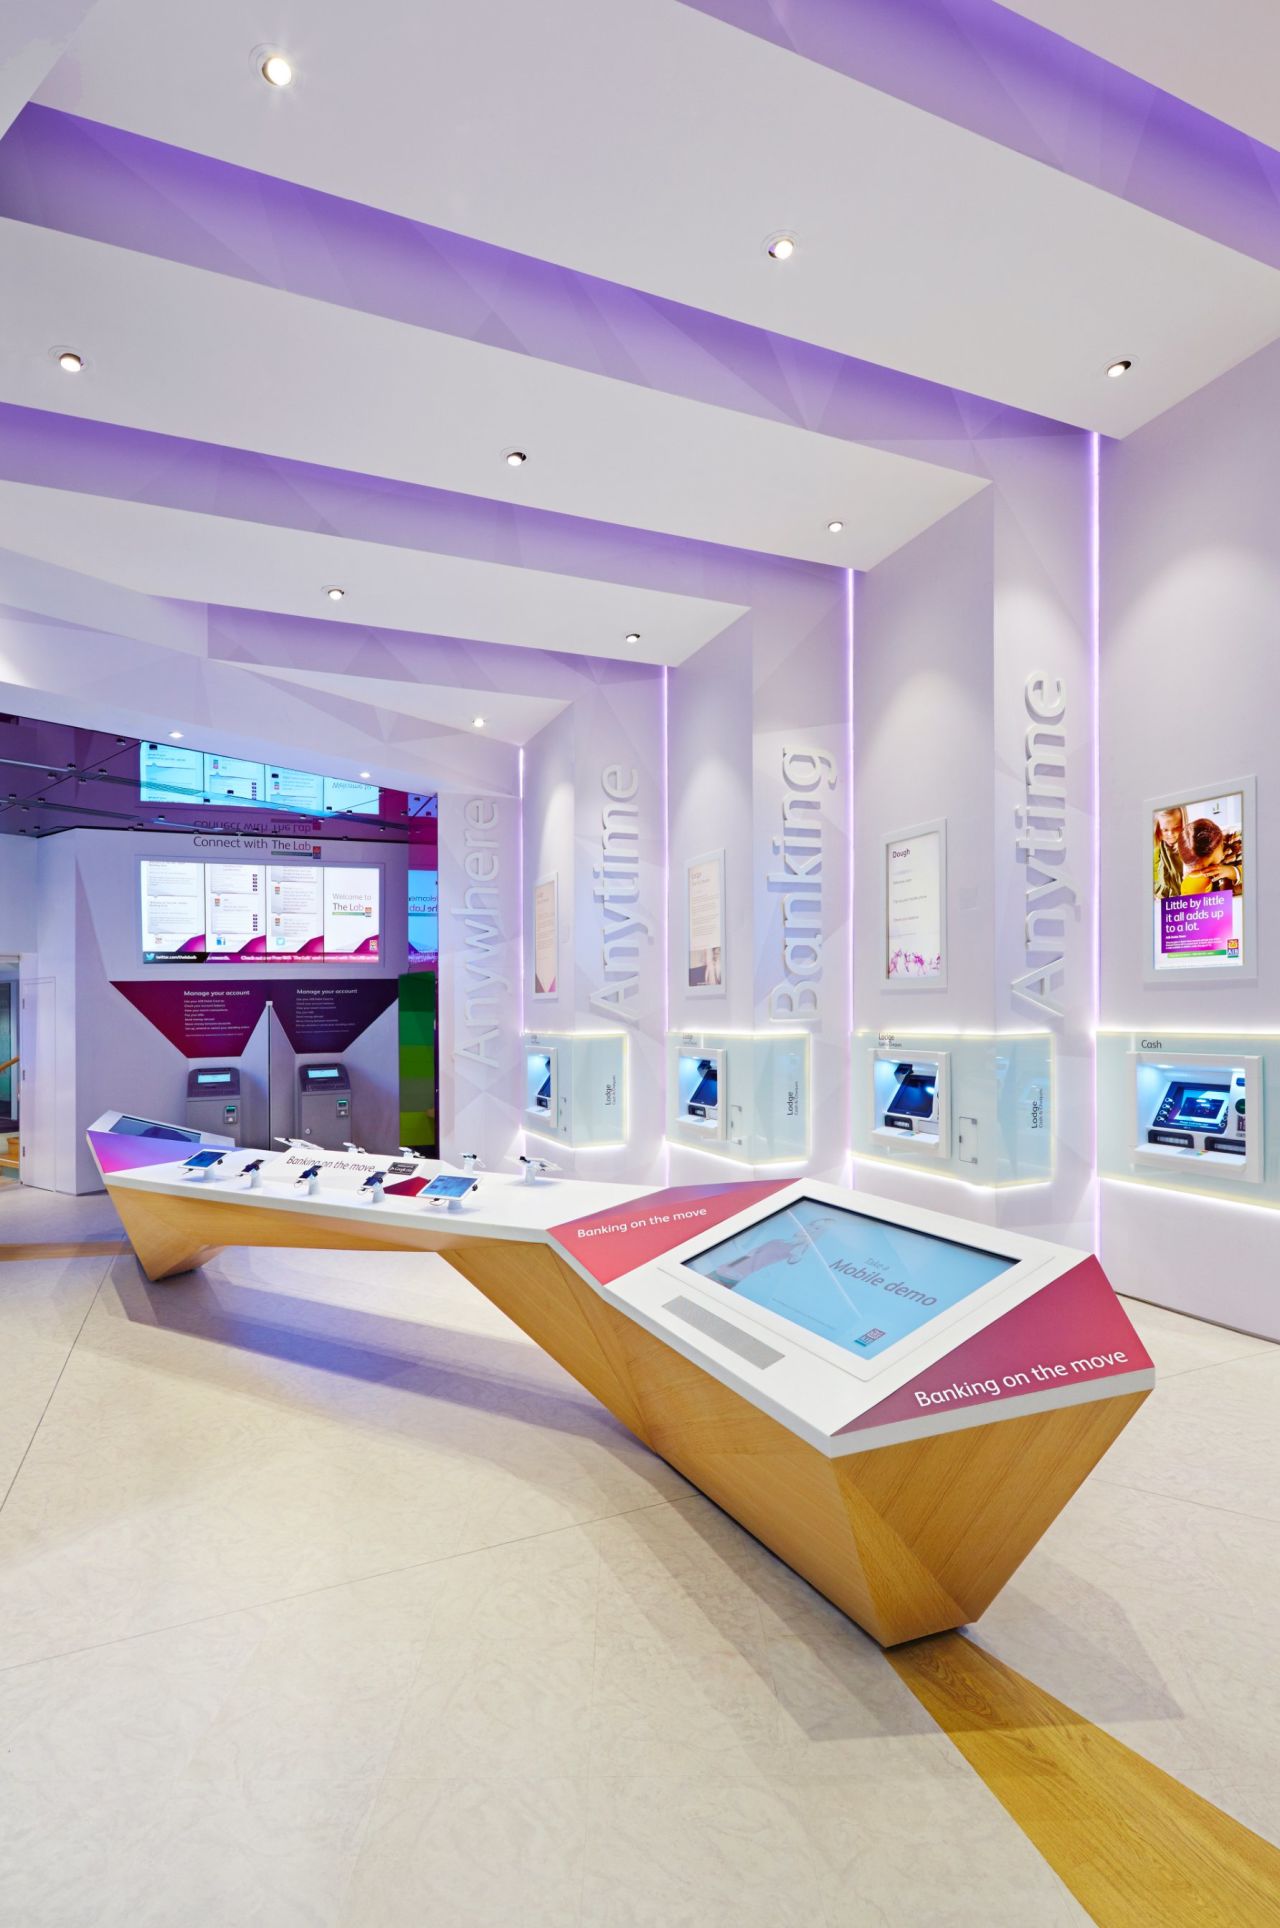 The Lab, Allied Irish Bank's digital banking store in Dublin, is centered around digital self-servicing technologies that help customers learn about its services. Visitors are offered free use of iPads, iMacs and wireless Internet.